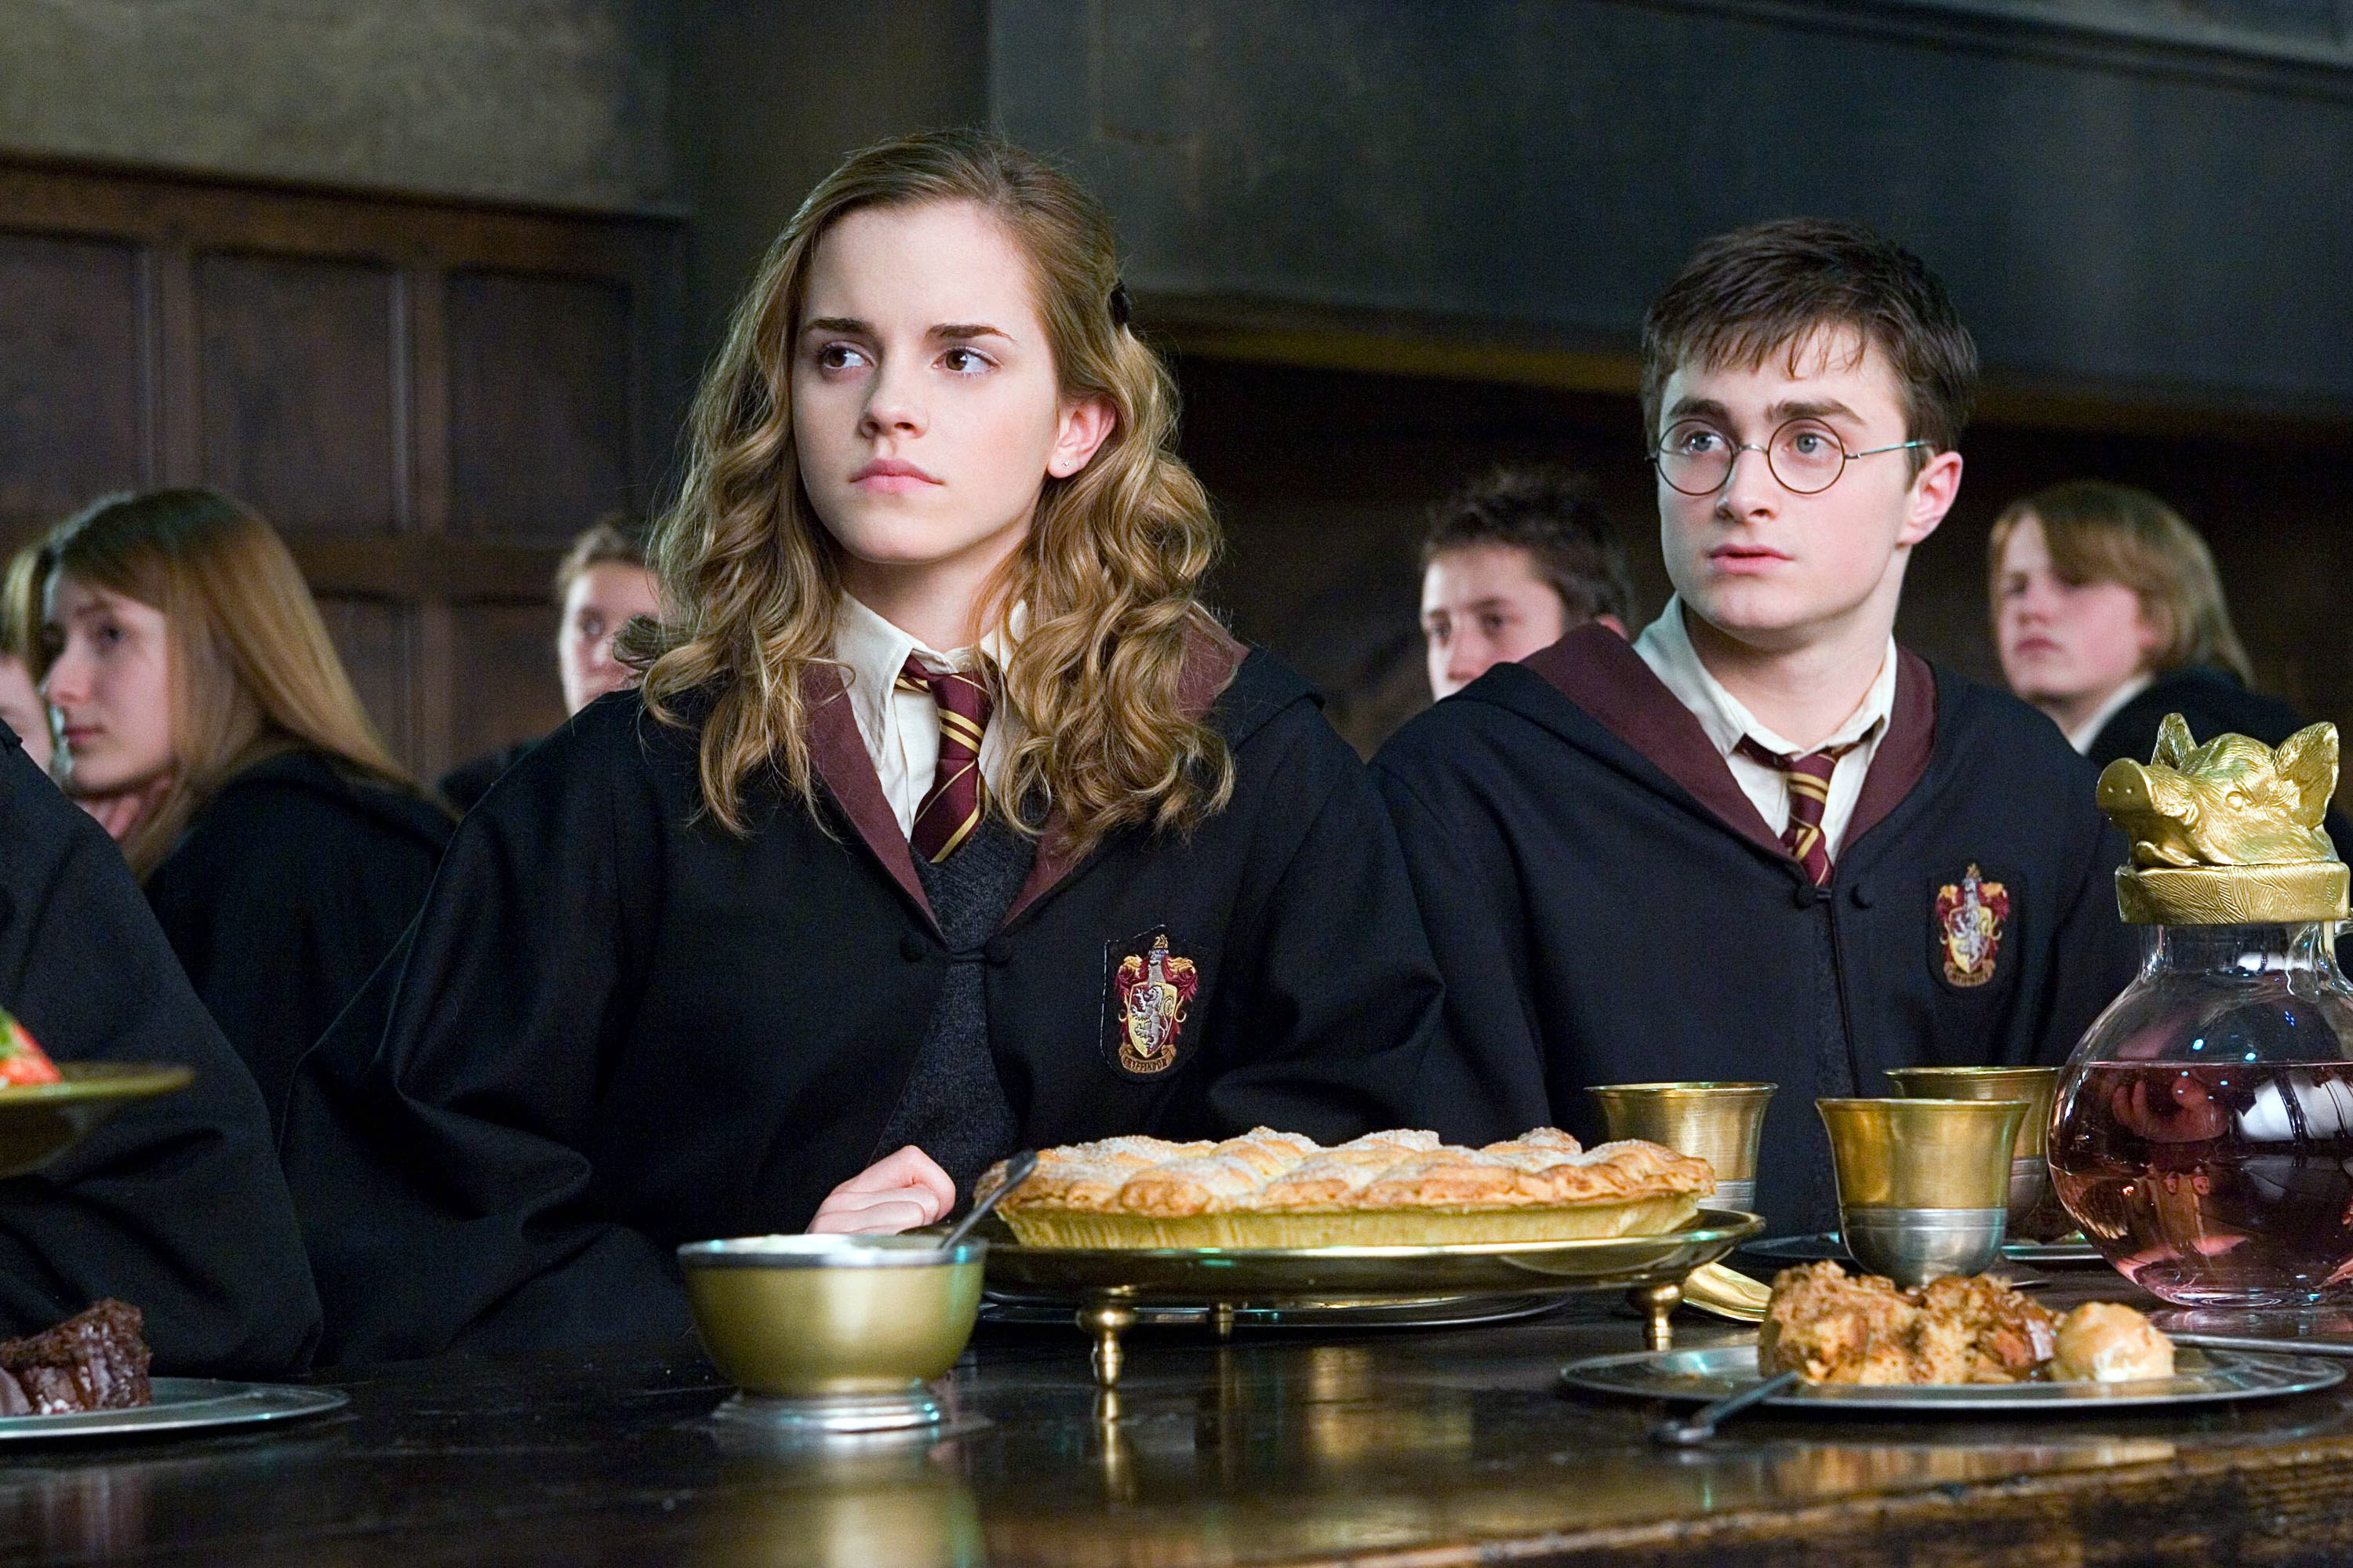 Emma Watson and Daniel Radcliffe eating lunch